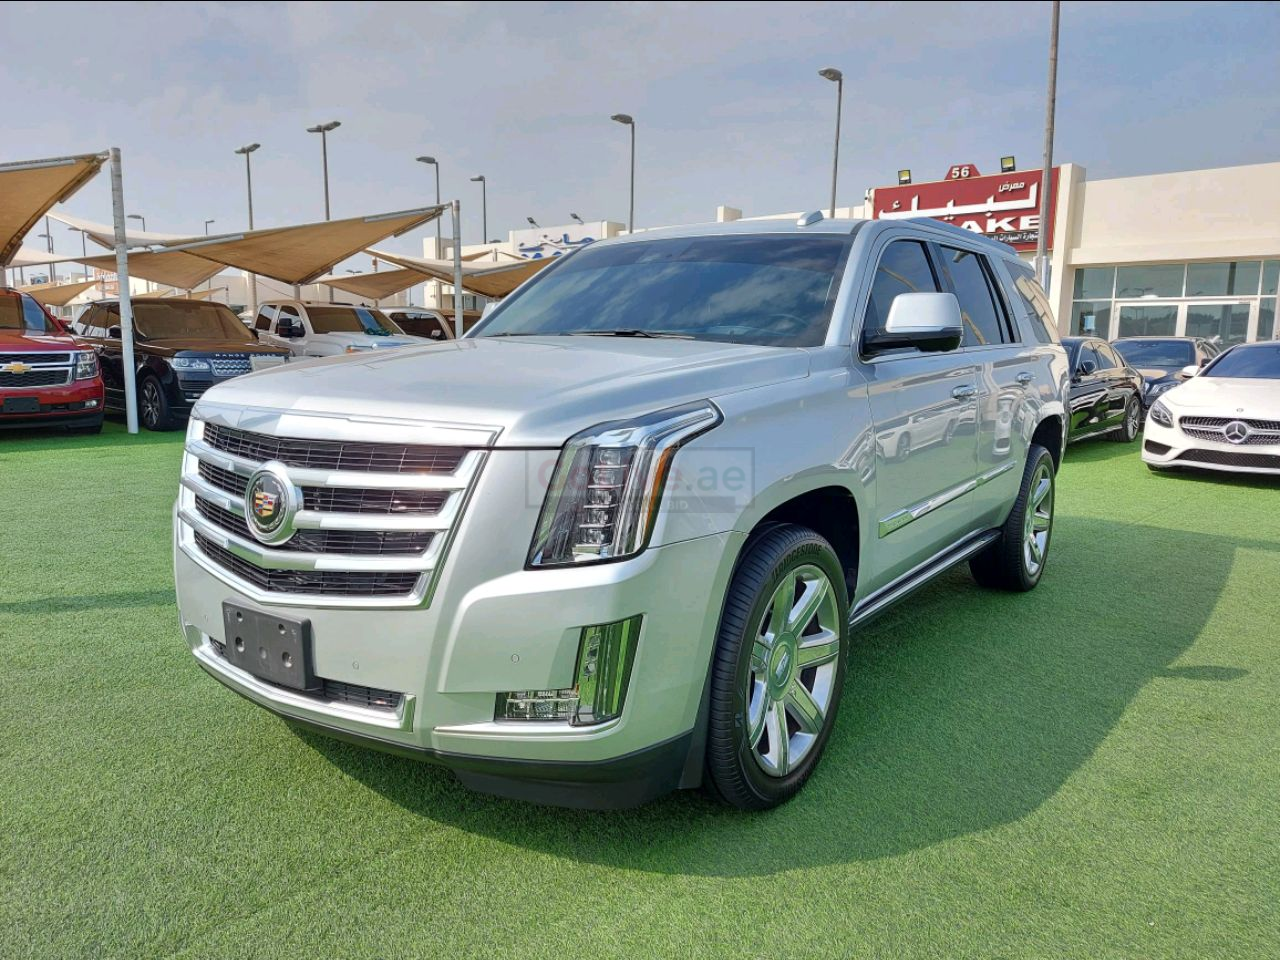 Cadillac Escalade 2015 AED 130,000, GCC Spec, Good condition, Sunroof, Navigation System, Fog Lights, Full Service Report